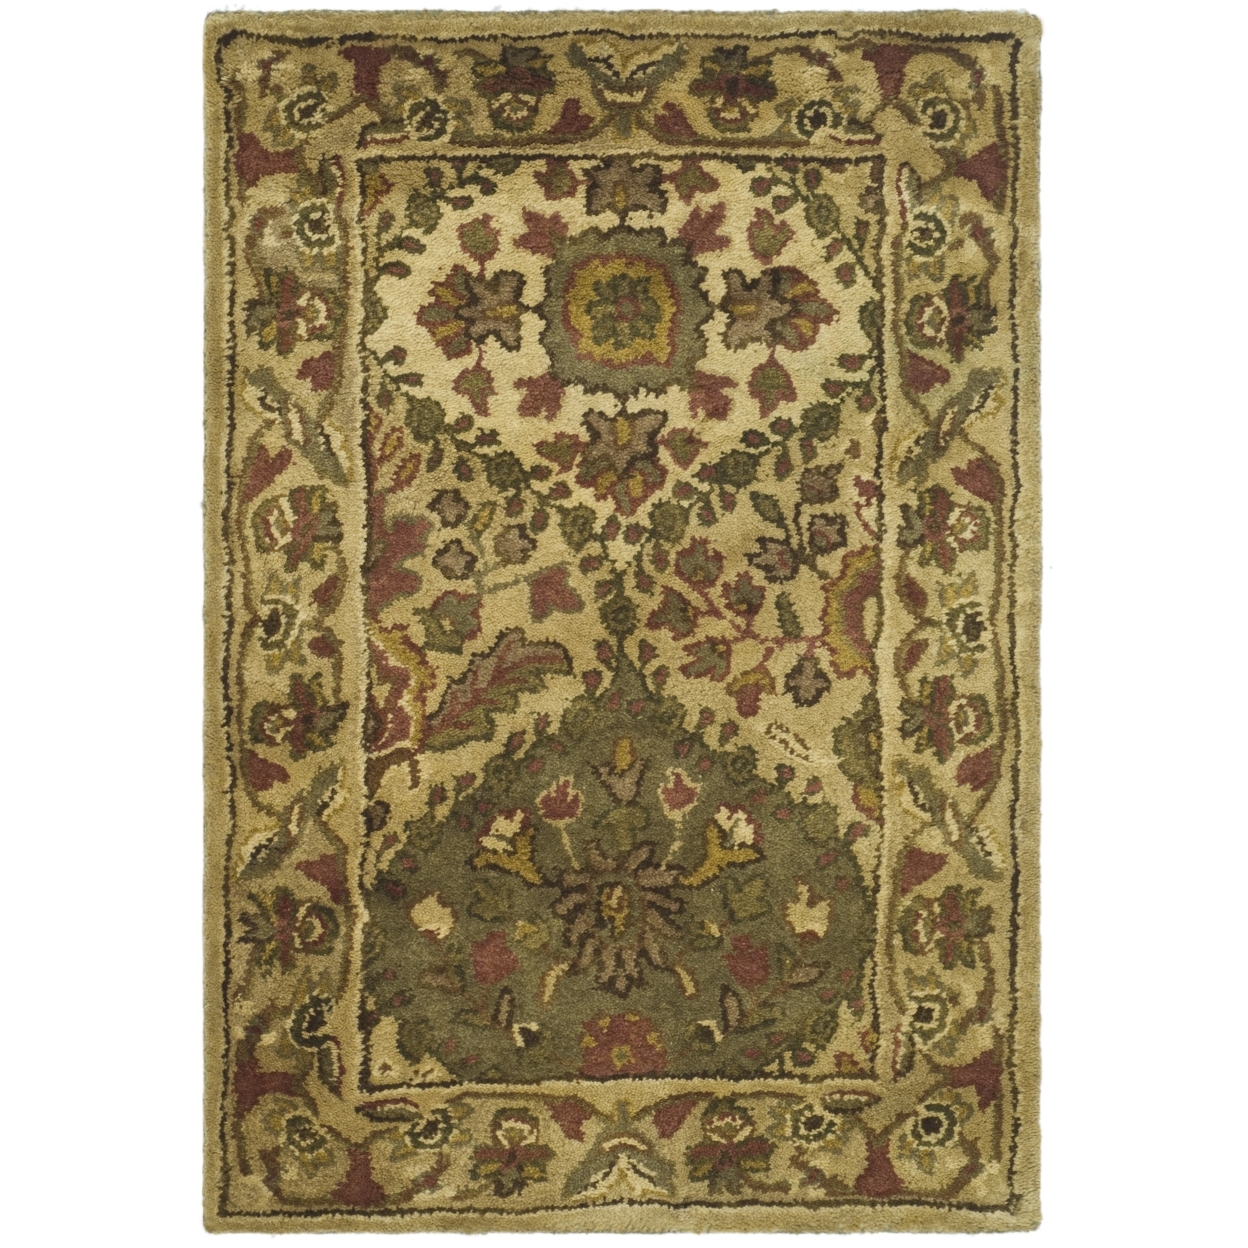 SAFAVIEH Antiquity Collection AT57D Handmade Beige Rug - 7' 6 X 9' 6 Oval